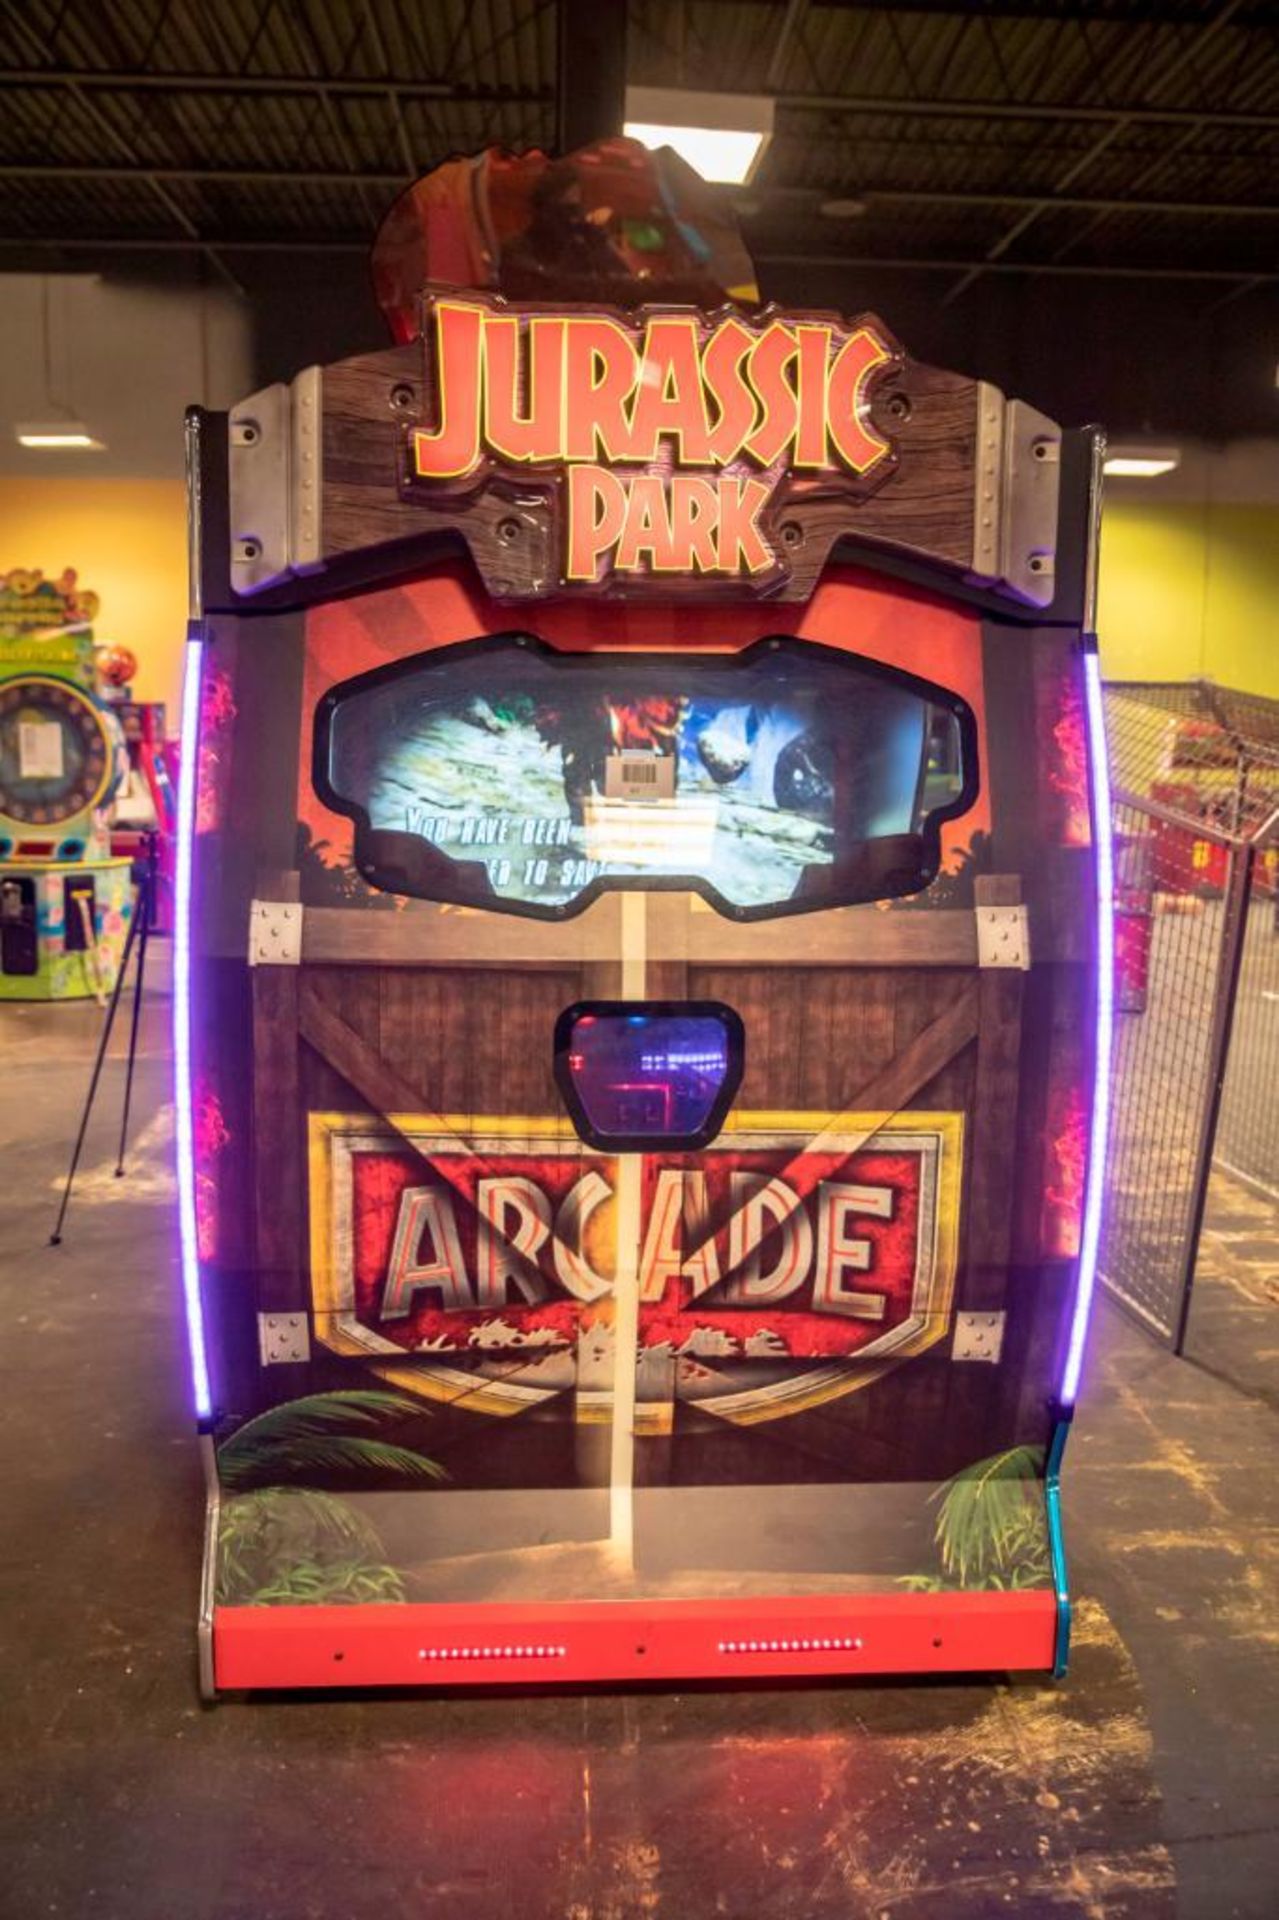 Jurassic Park by Raw Thrills - Functional. Used, shows commercial use. See pictures.